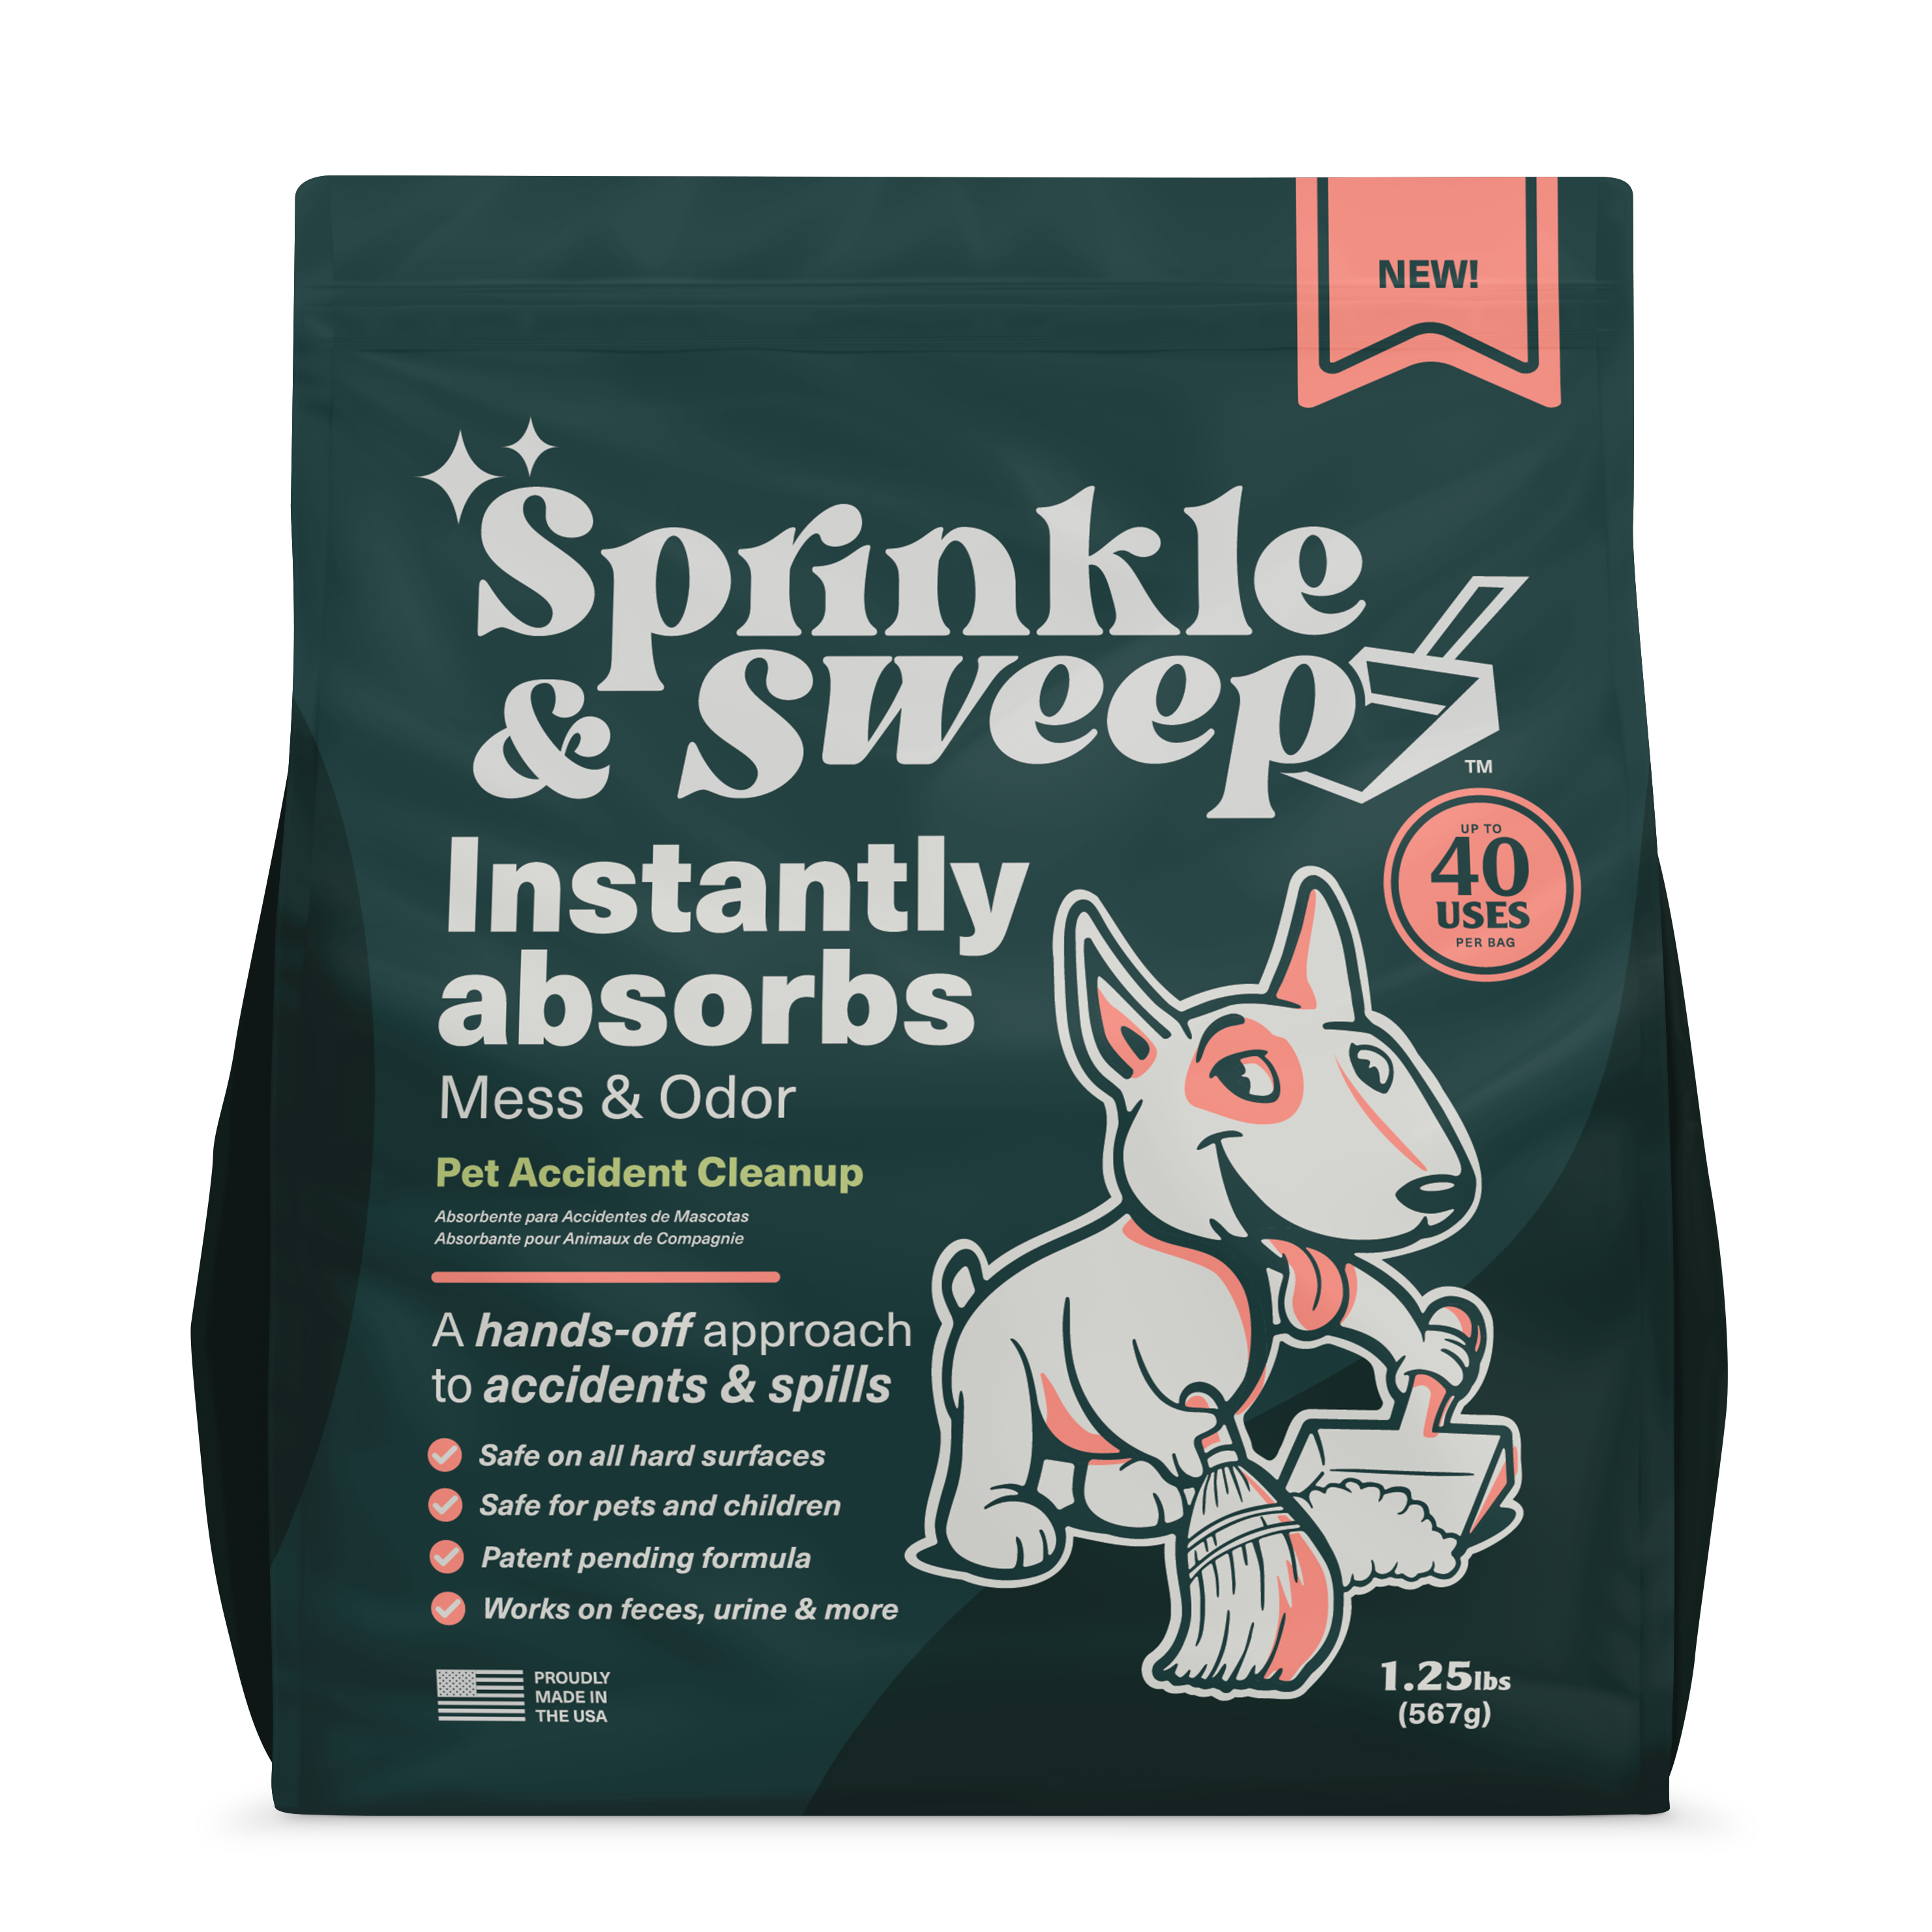 Sprinkle & Sweep | Pet Accident Cleanup, In a Snap! - k9culture Sprinkle & Sweep